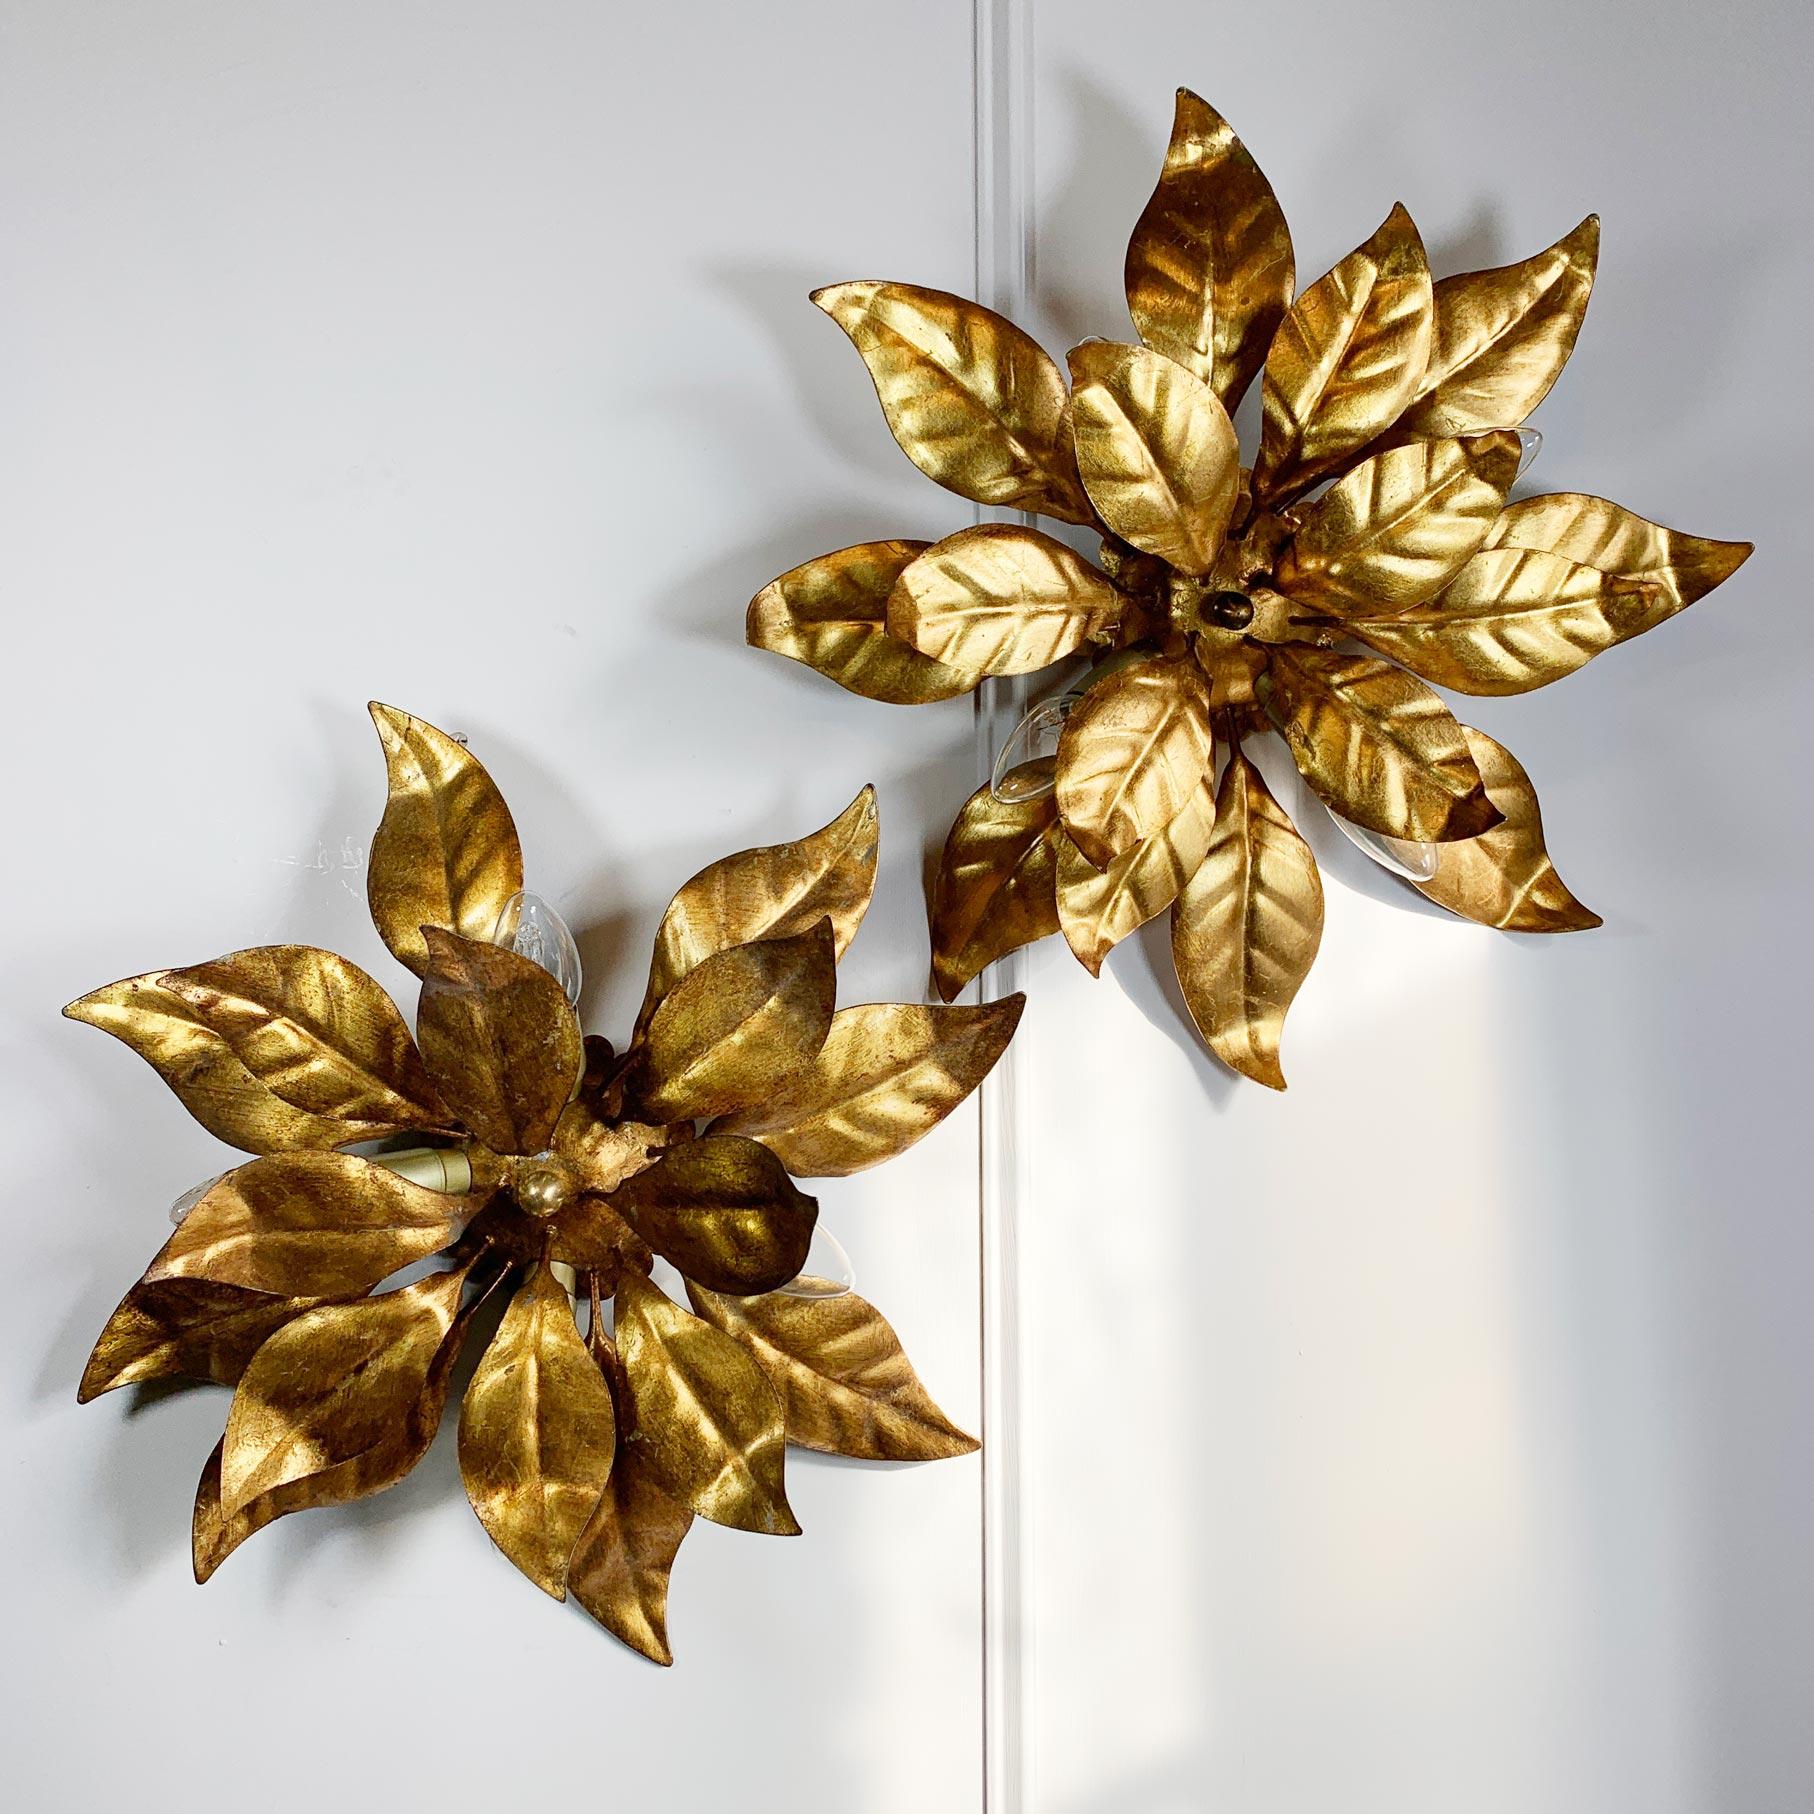 A matched pair of 1970's gilt leaf ceiling or wall lights by Hans Kogl, in the form of leaves.

Measures: 45cm width x 15cm depth. Back rose is 12cm across.

Price shown is for the pair.

